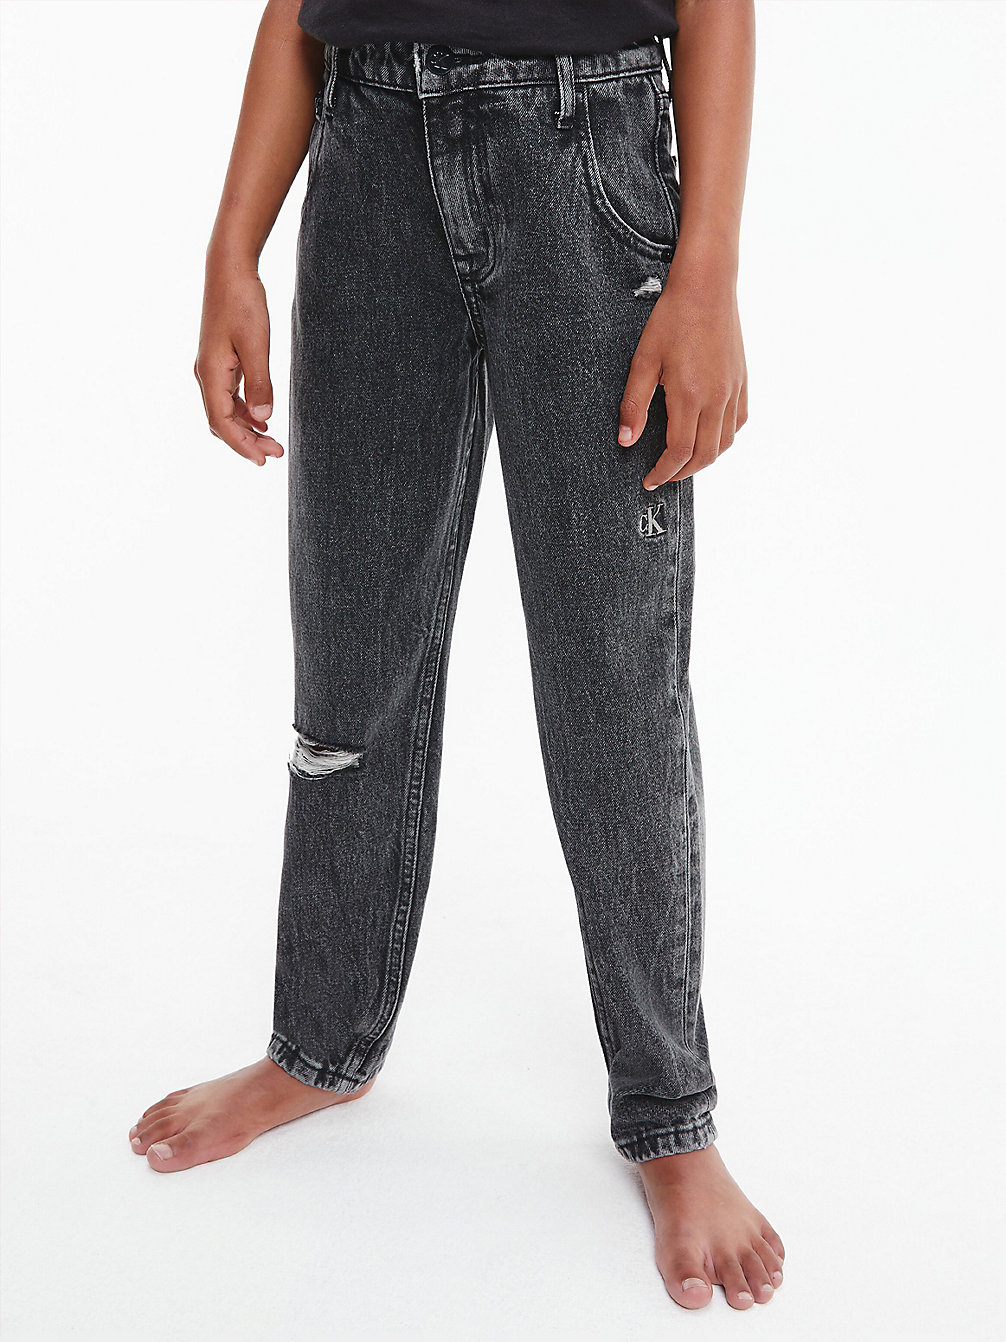 Relaxed Barrel Leg Jeans > WASHED STONE GREY BLACK > undefined girls > Calvin Klein